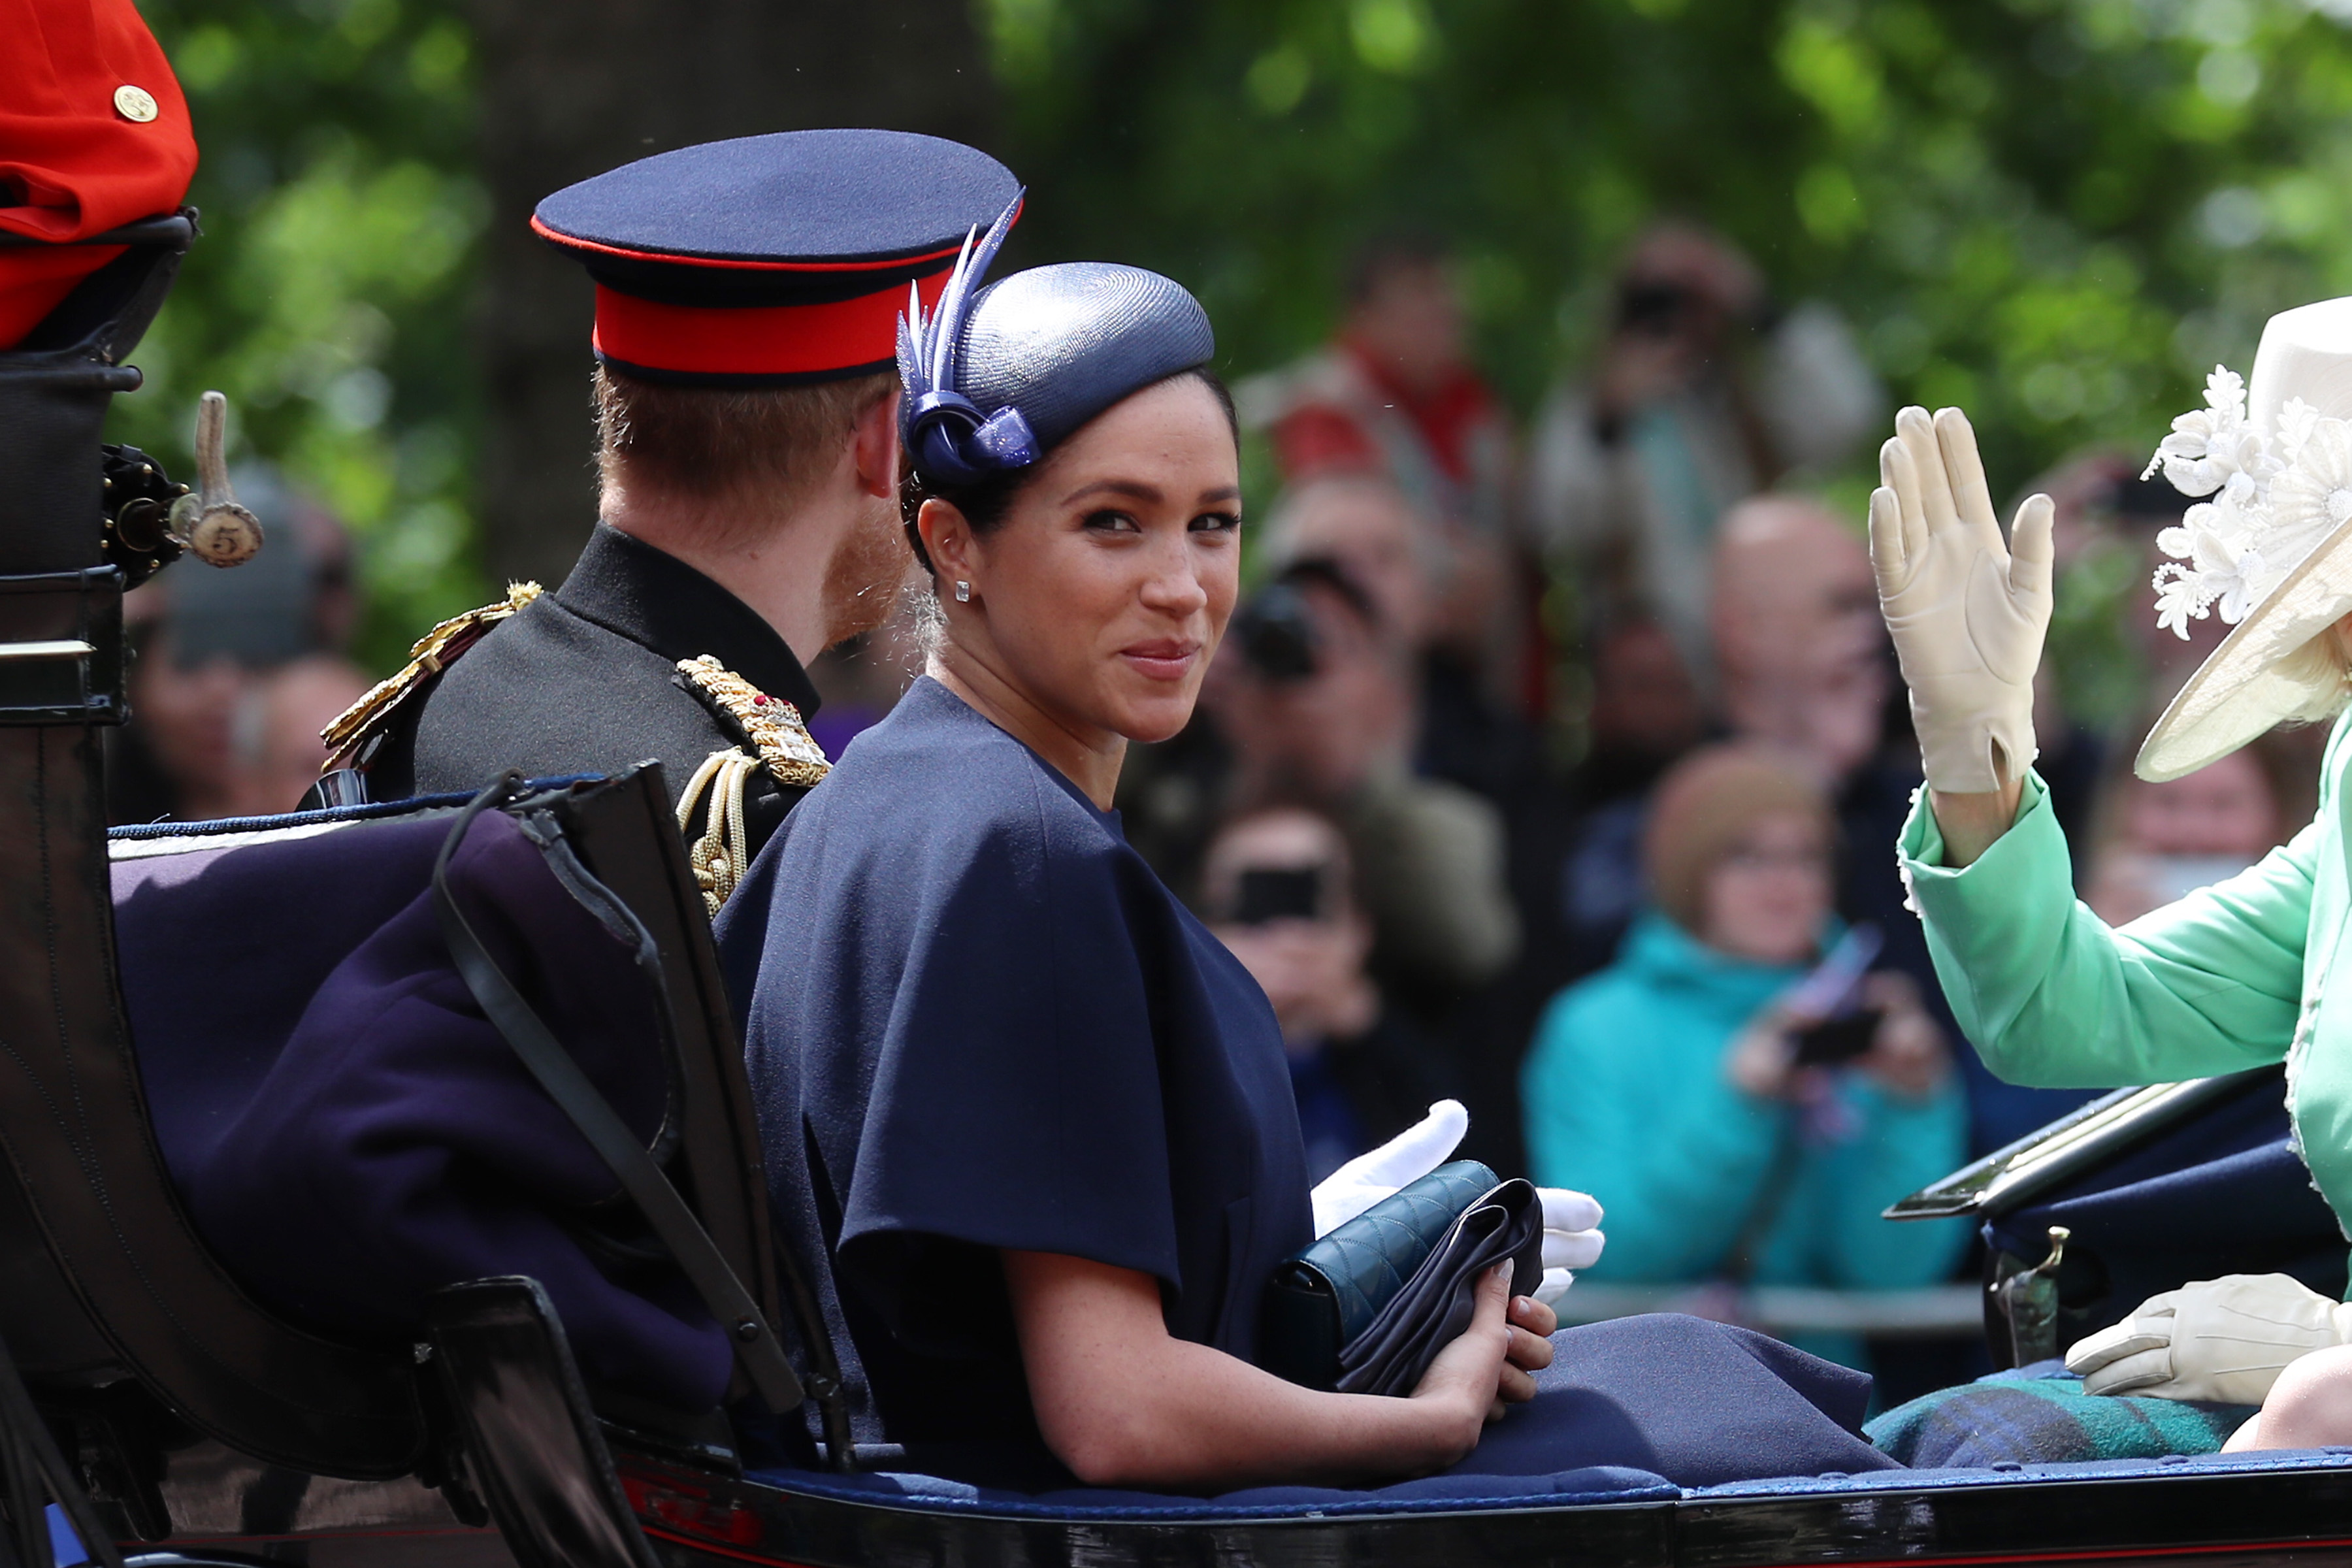 Meghan Markle smiling in carriage during Trooping The Colour 2019